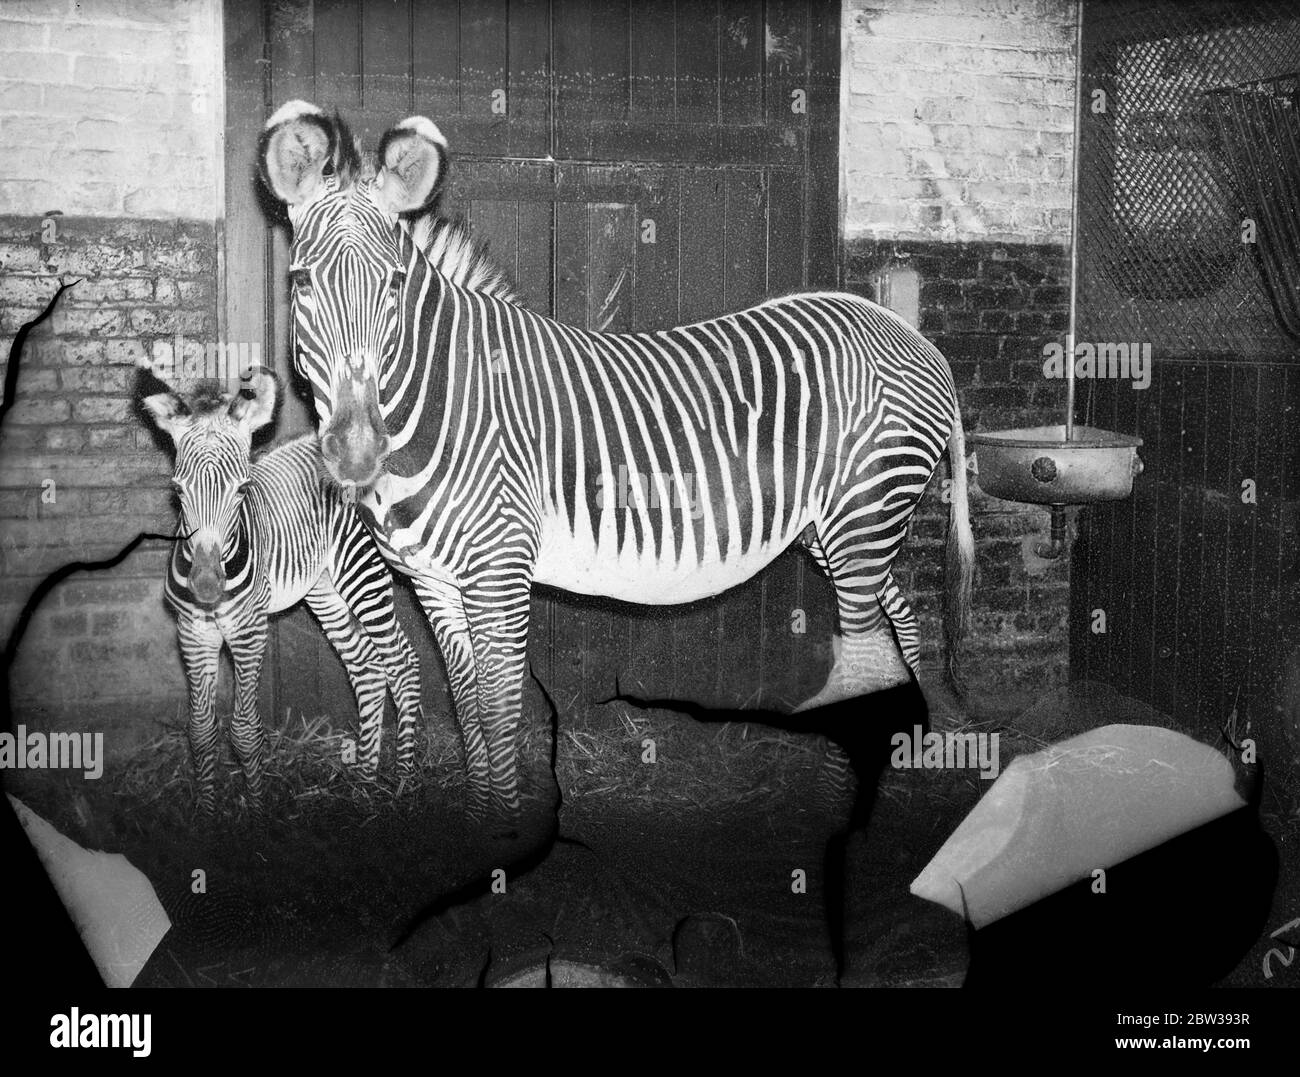 New baby zebra born at London Zoo . Jenny , the zebra at London Zoo , presented its keeper with a baby daughter on Good Friday . It is proposed to name the filly foal ,  Freda  . Photo shows ; Jenny the zebra with her daughter at London Zoo . 4 April 1934 30s, 30's, 1930s, 1930's, thirties, nineteen thirties Stock Photo